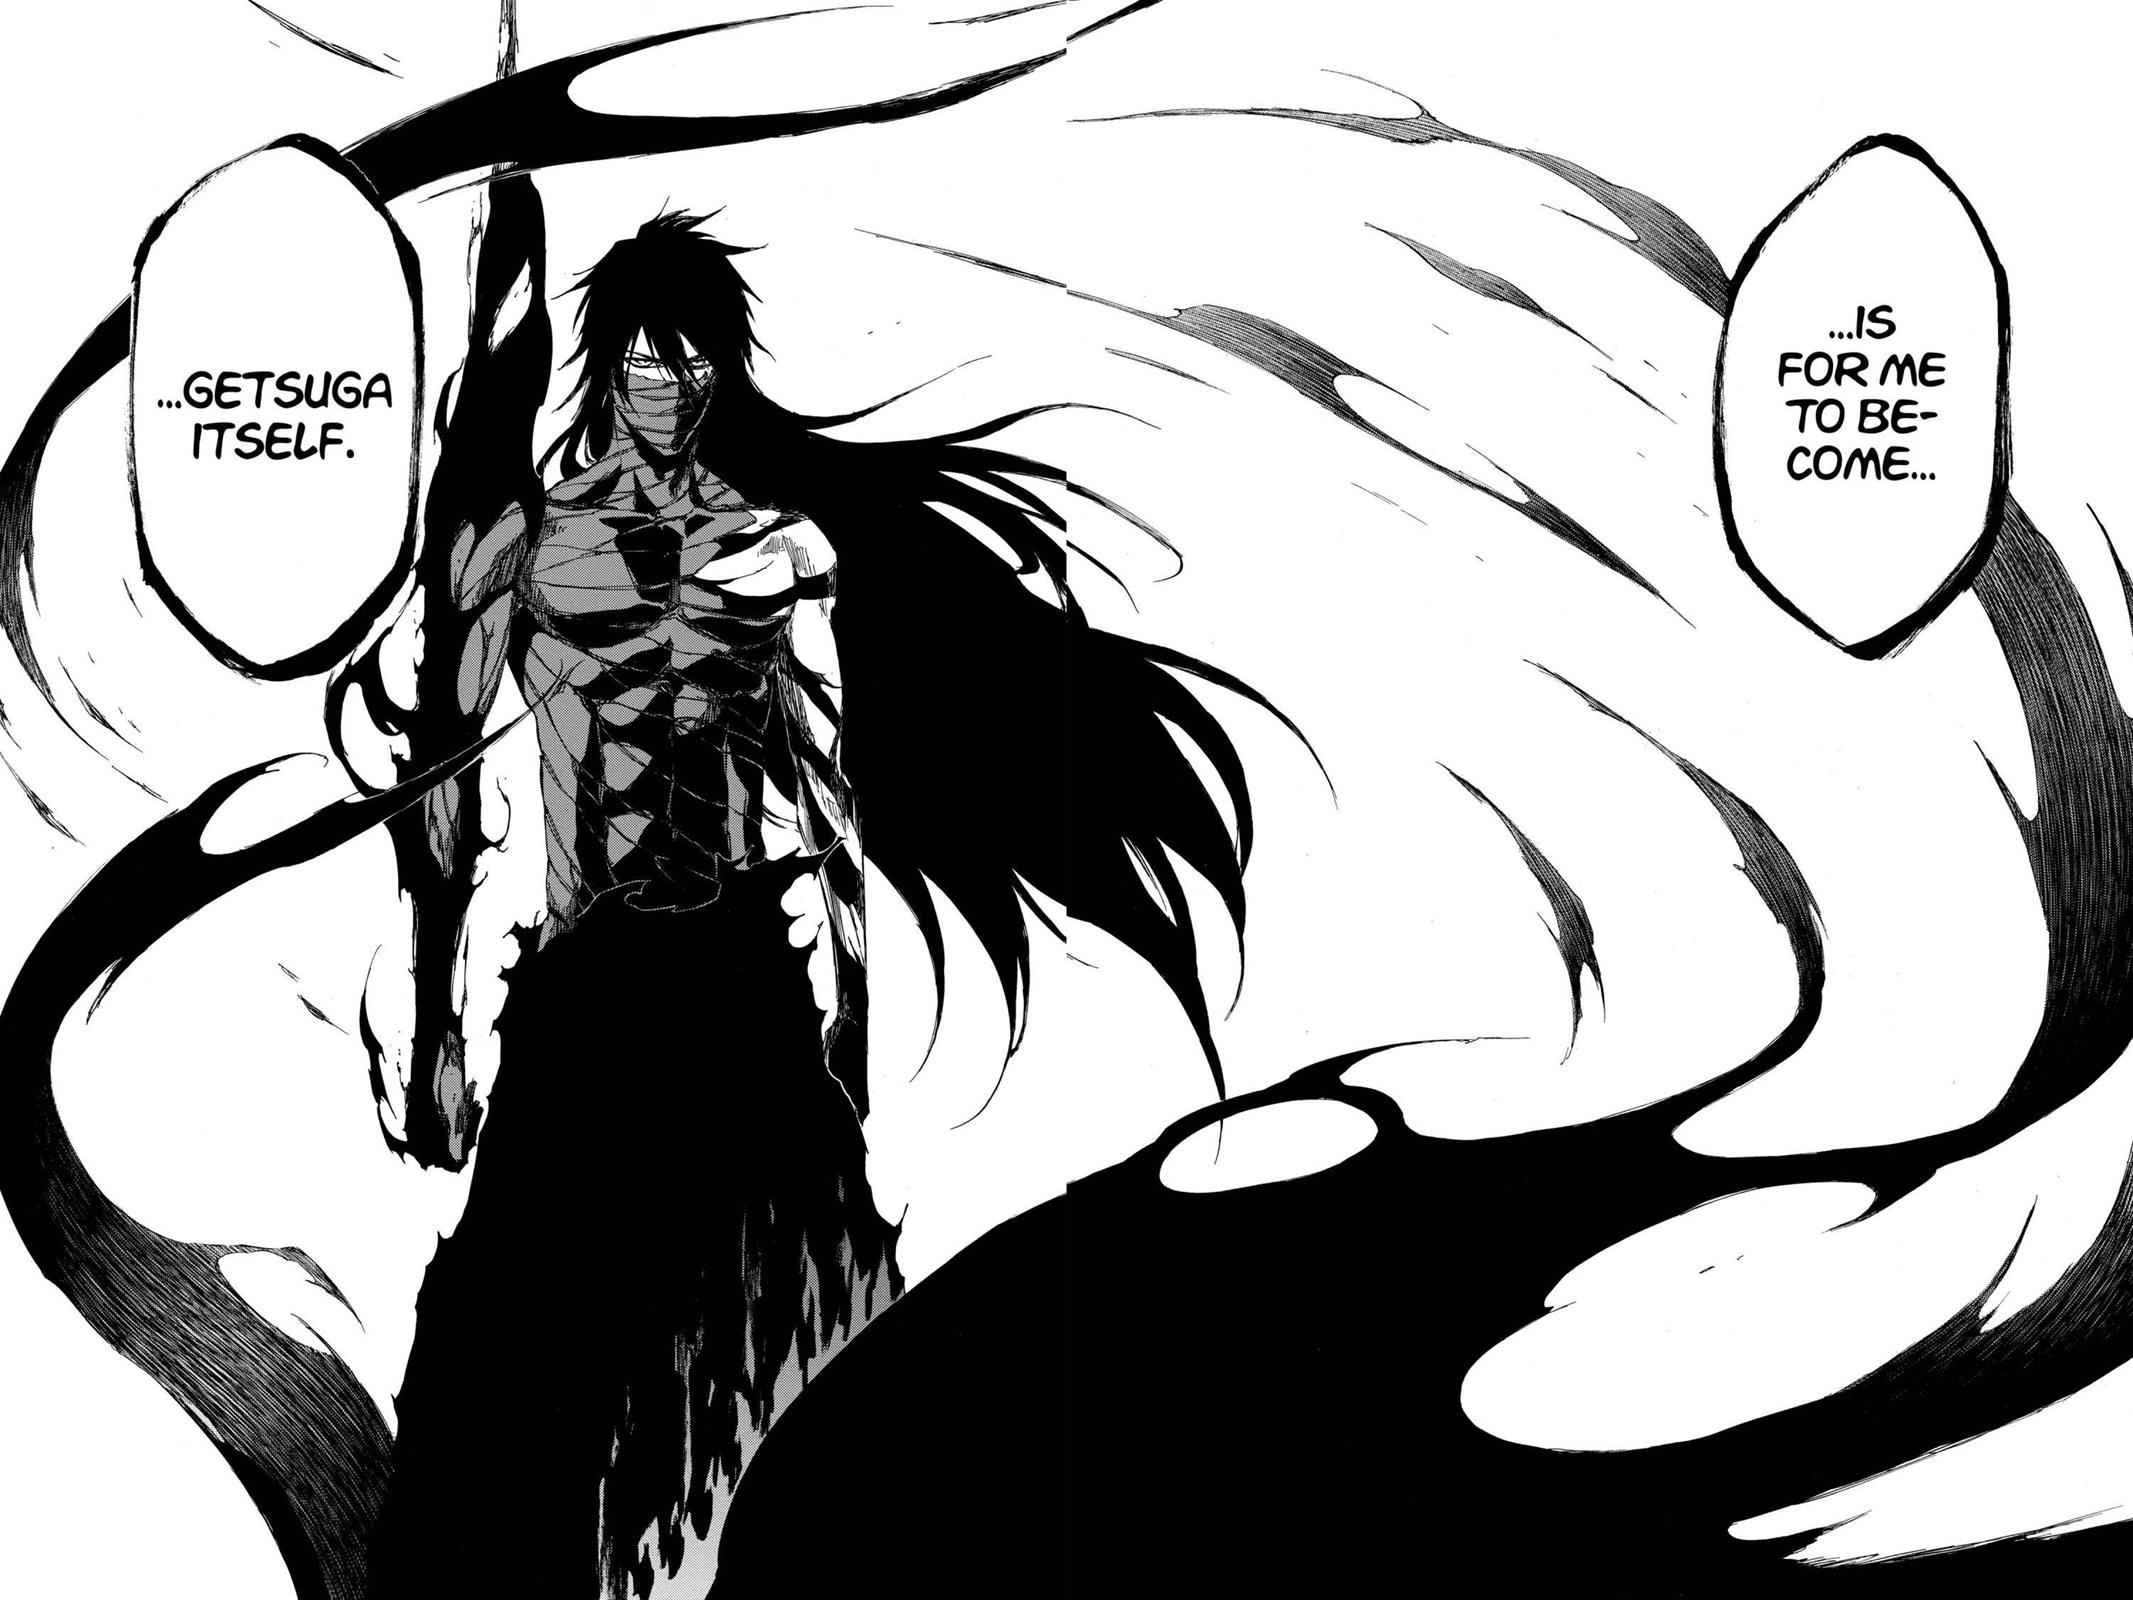 Ichigo's Getsuga Tenshou form covered in bandages and darkness from Bleach